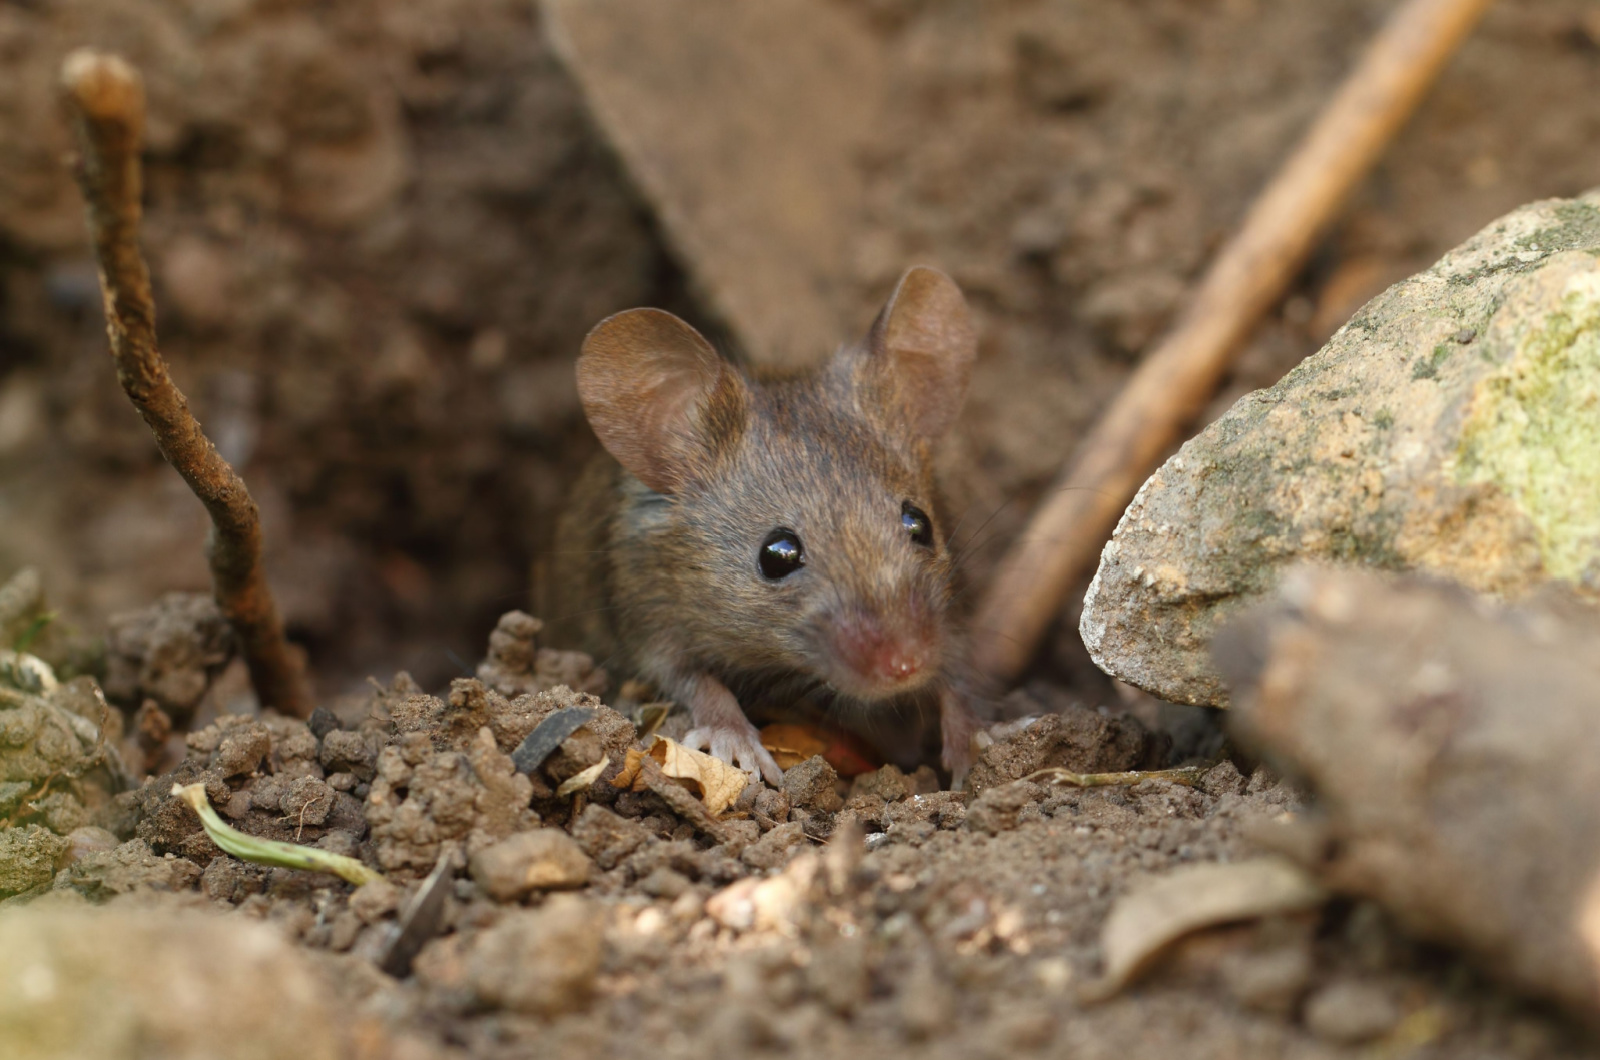 close up view of a garden mouse